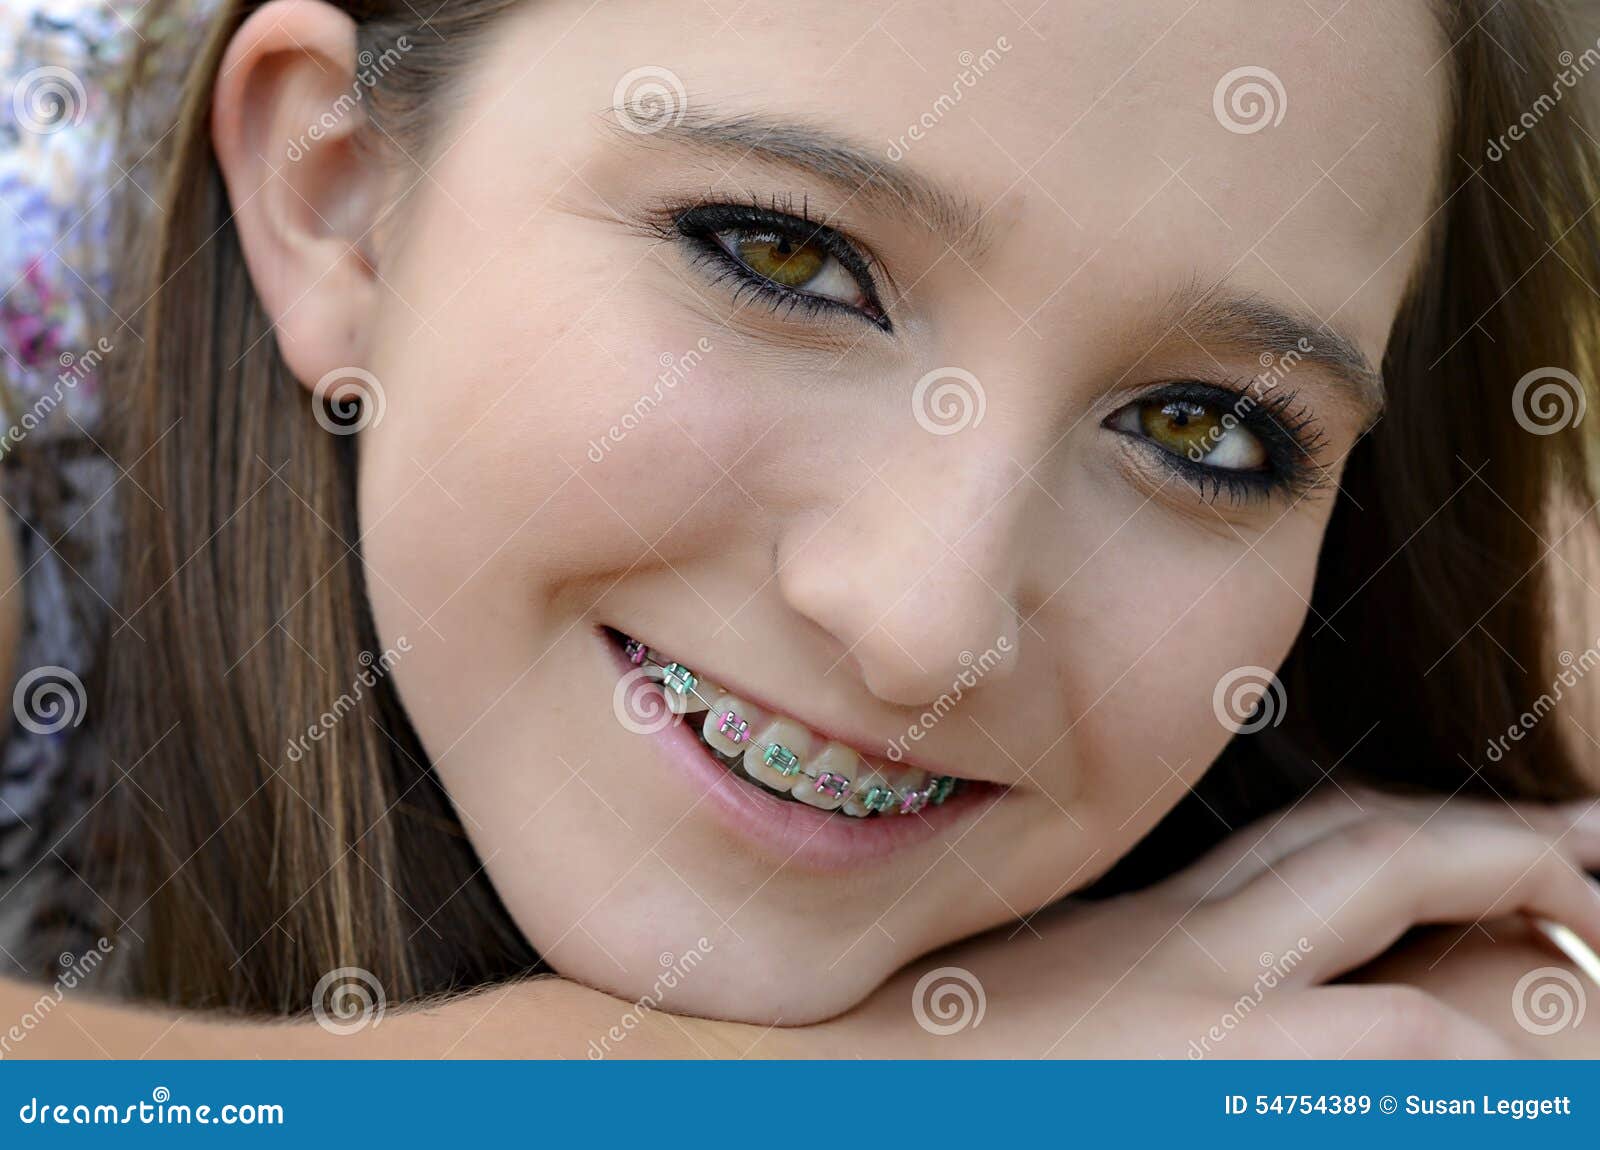 Cute teens with braces facial